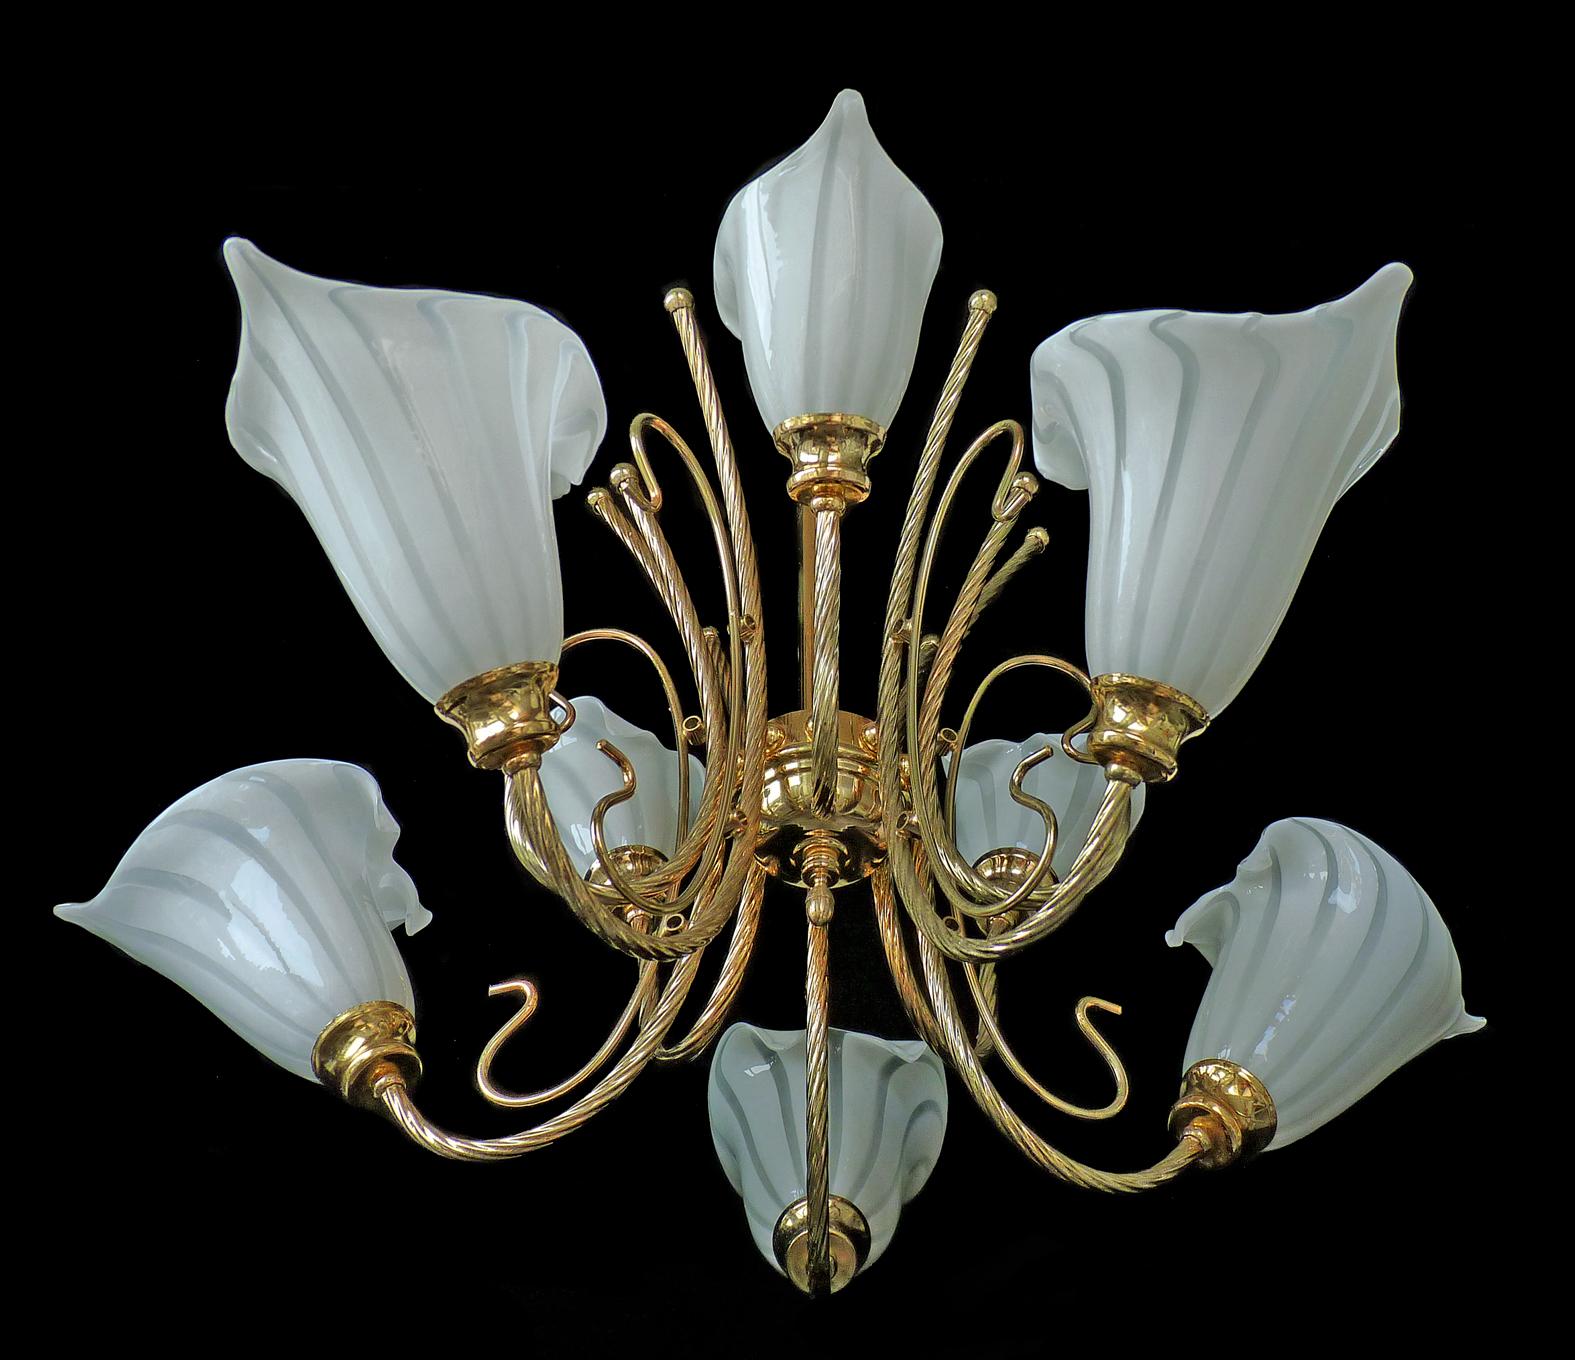 Awesome 1970s vintage Italian Murano Lily Calla art glass shades gilt chandelier. Franco Luce Seguso chandelier with 10 hand blown Murano glass shades, white and clear glass and gold-plated brass.
Measures:
Diameter 31.5 in/ 80 cm
Height 39.4 in/